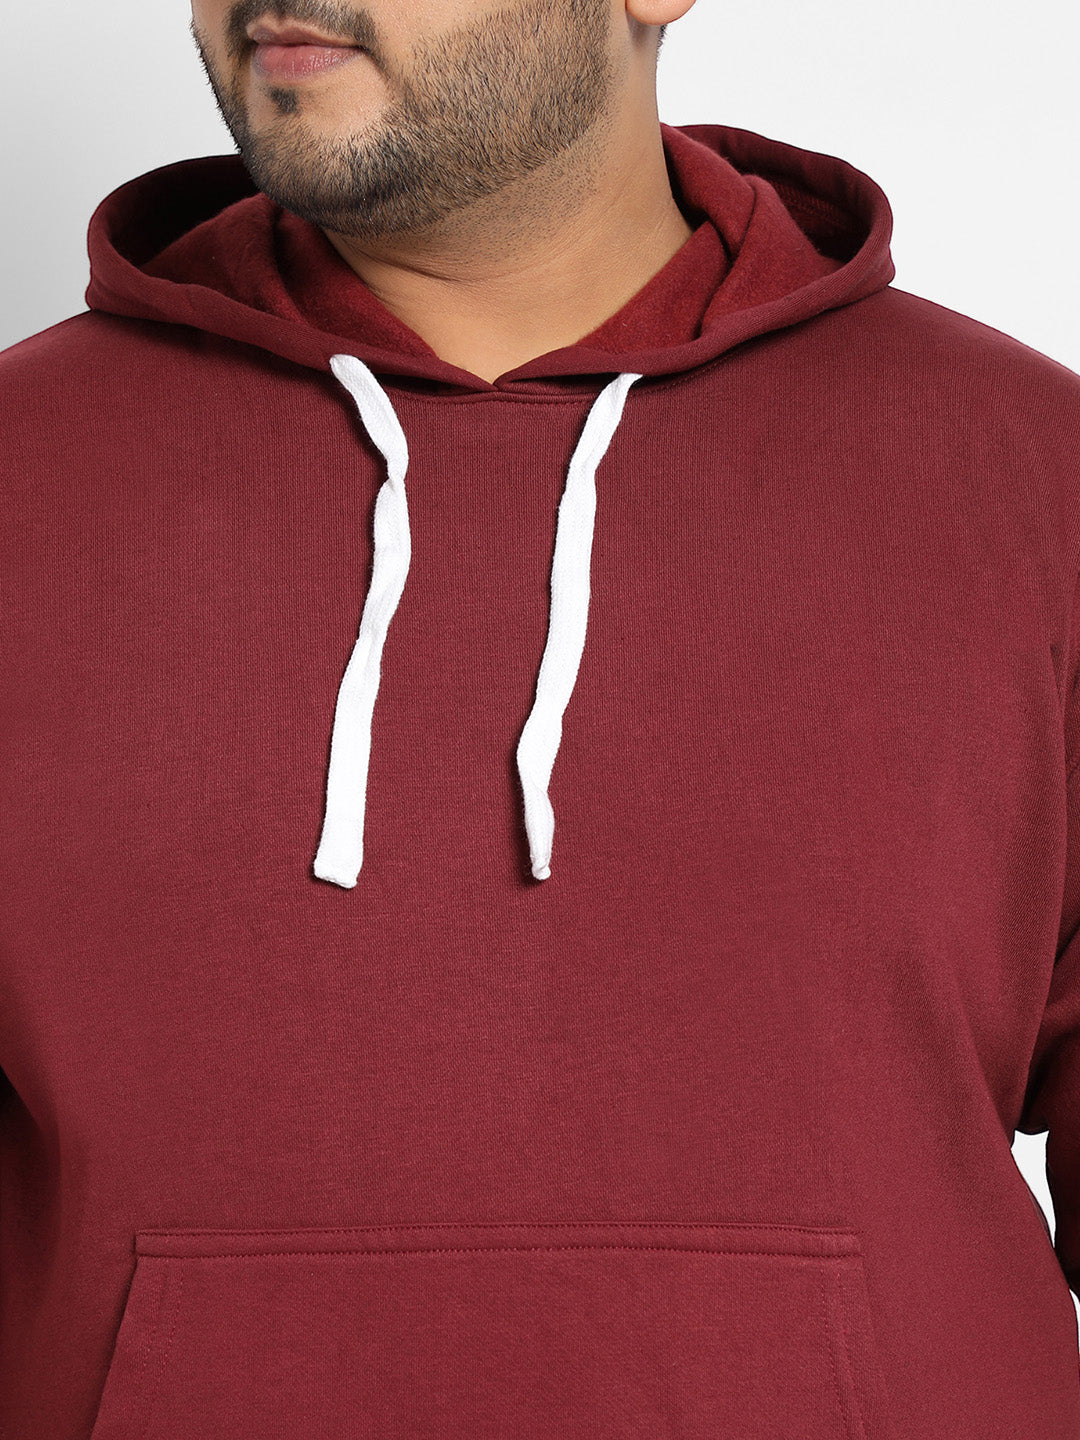 Plus Size Men's Maroon Red Pullover Hoodie With Contrast Drawstring